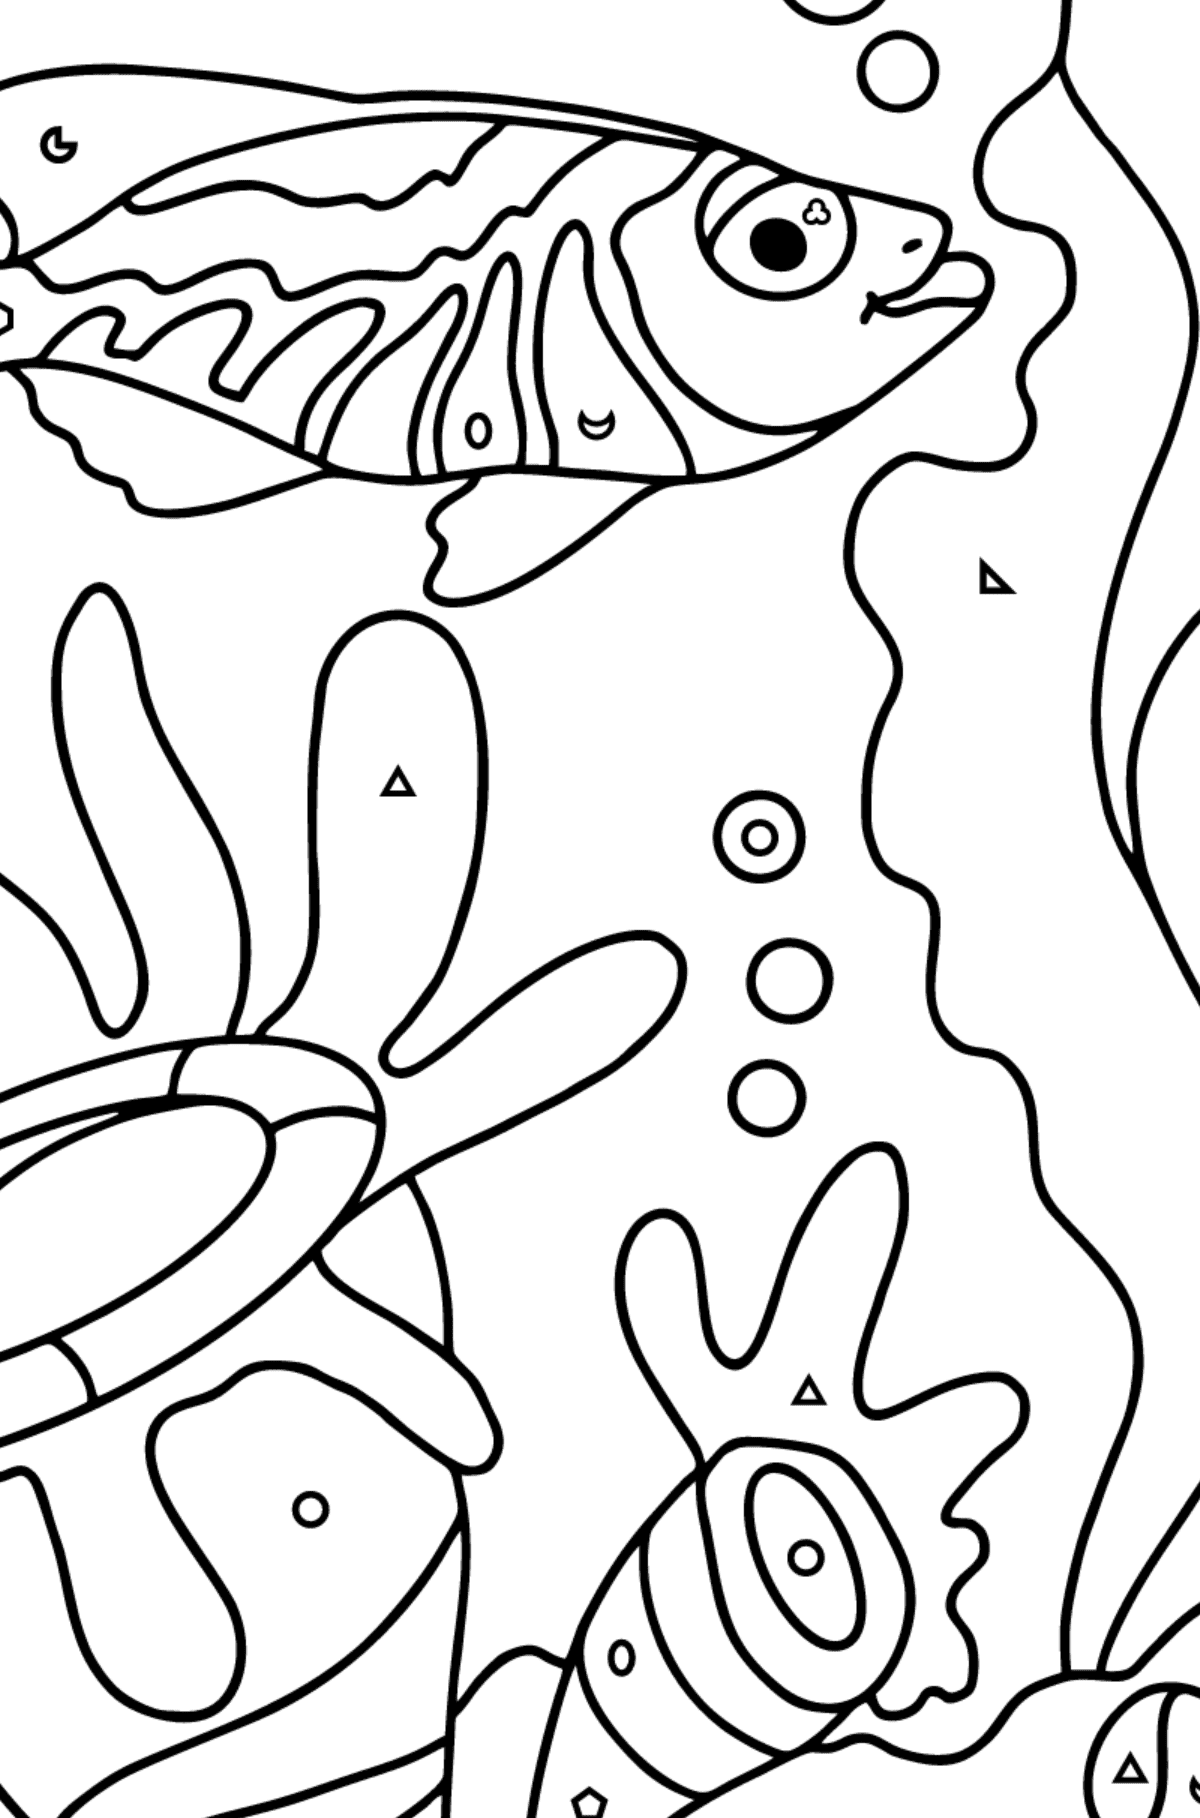 Coloring Page - A Fish is Admiring the Corals - Coloring by Geometric Shapes for Kids